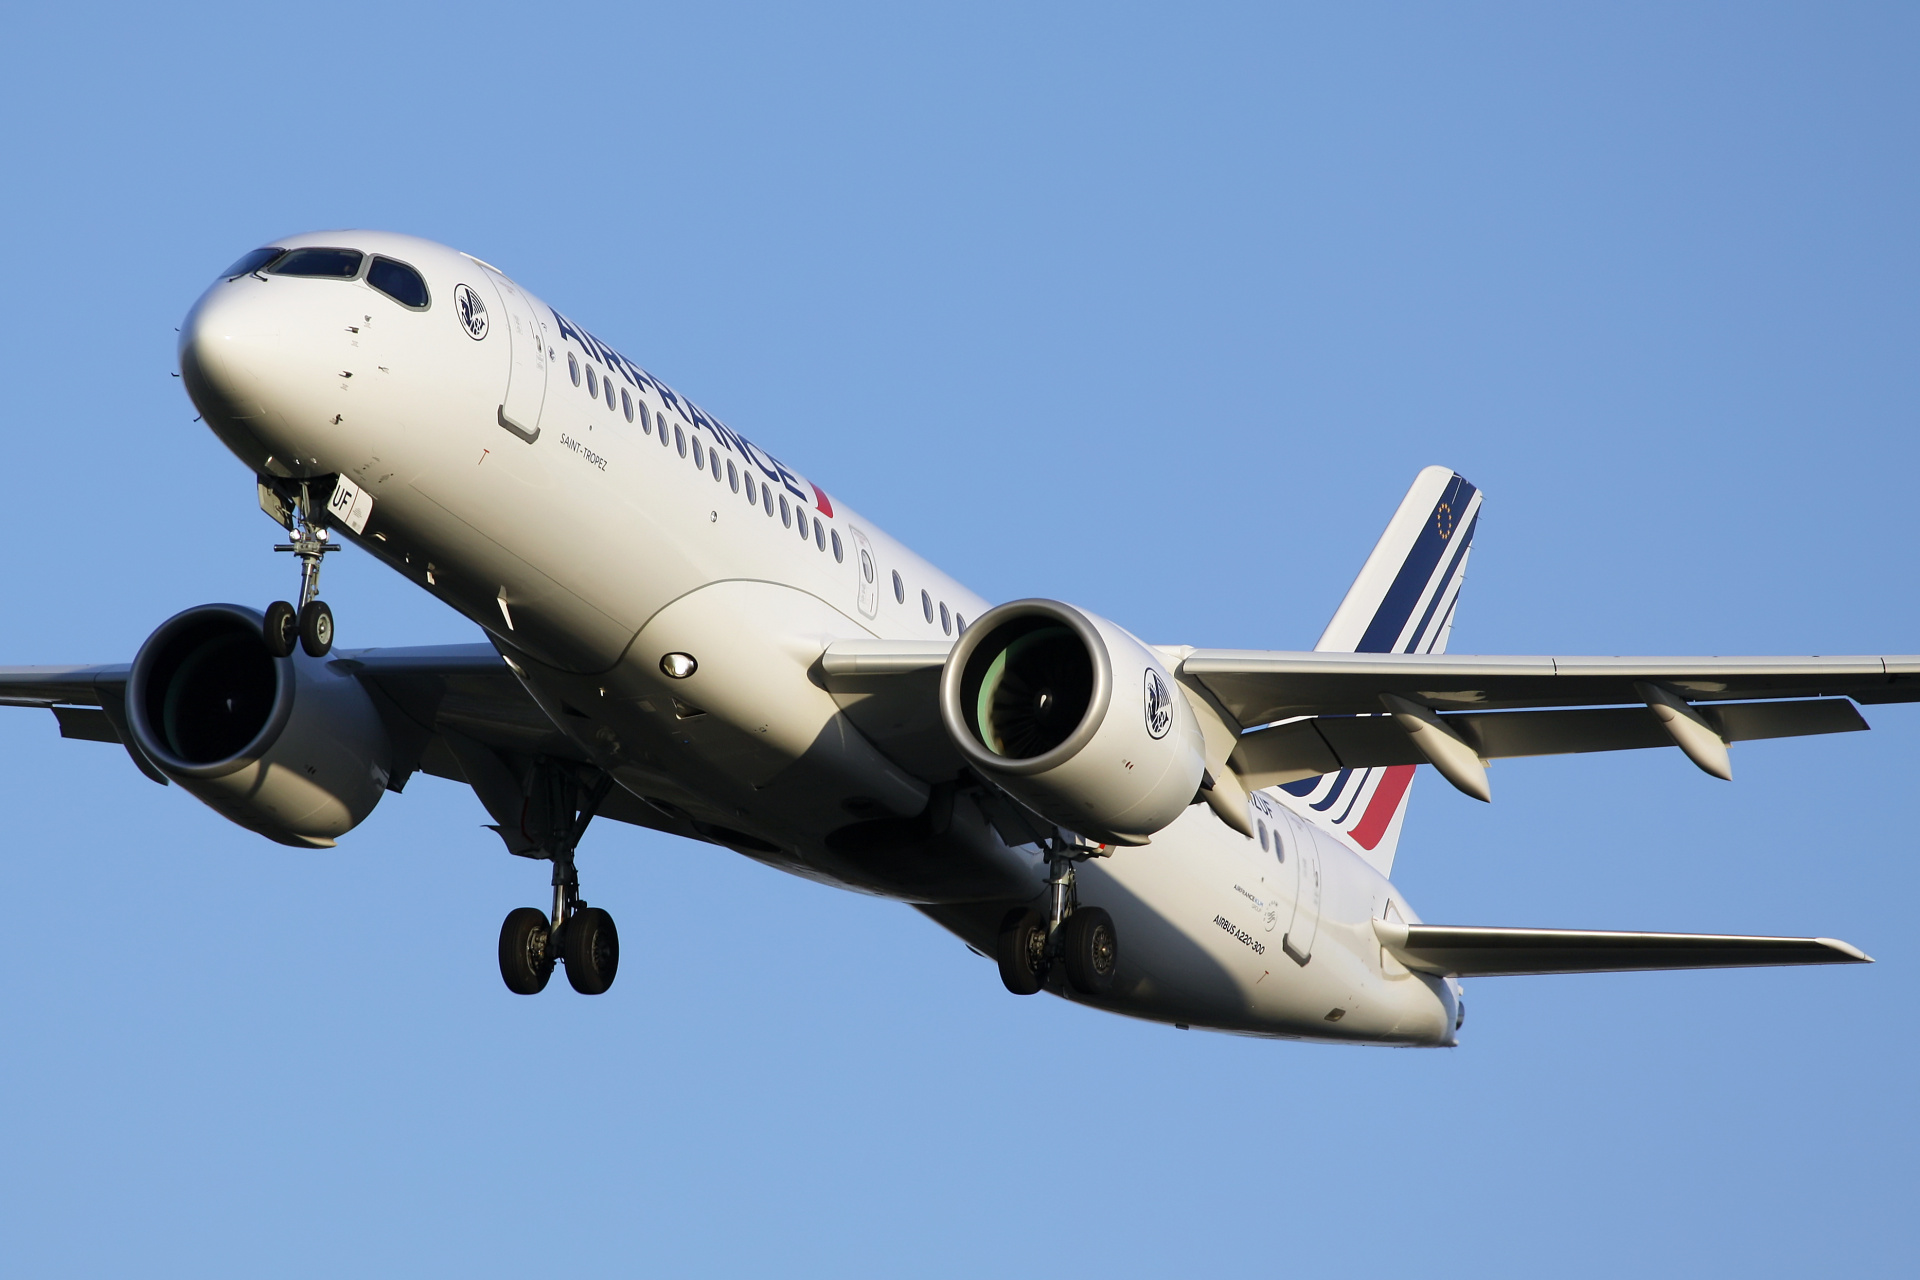 F-HZUF (Aircraft » EPWA Spotting » Airbus A220-300 » Air France)